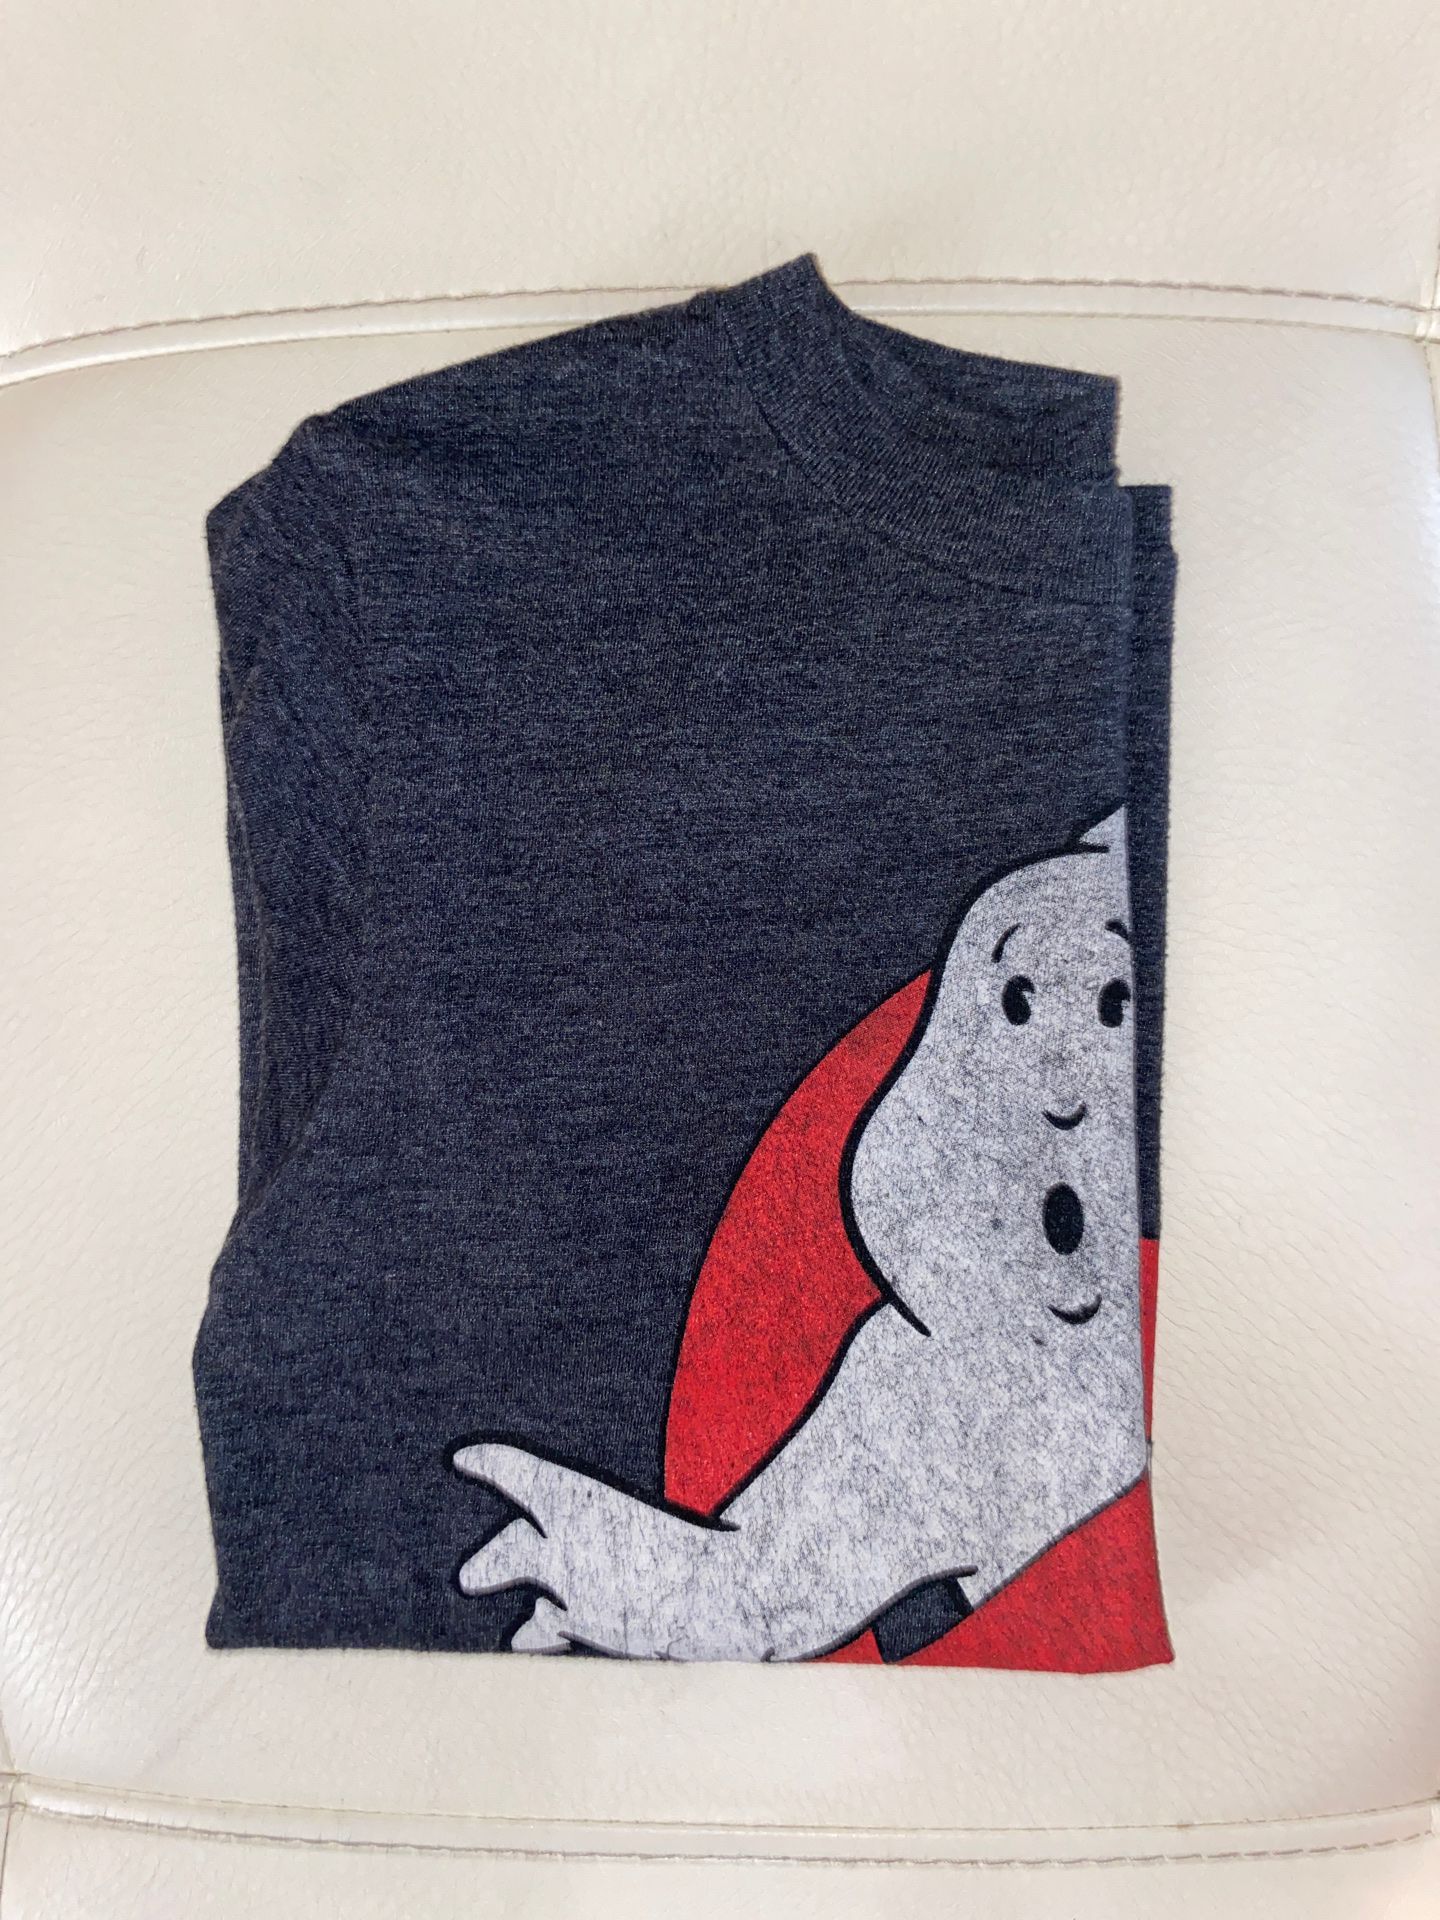 Ghostbusters T-shirt, size small for kids